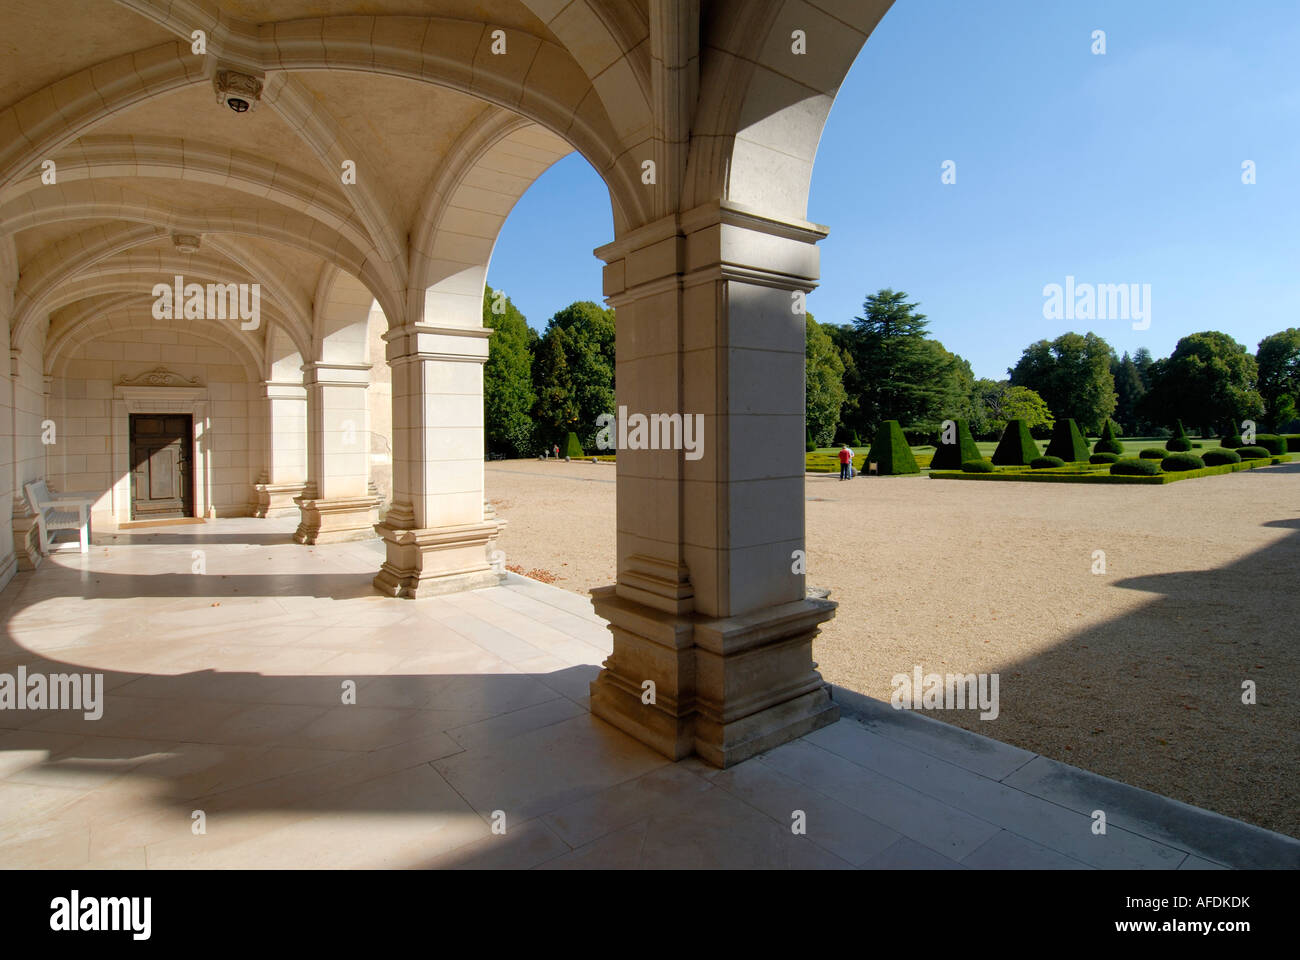 Chateau and gardens at Azay-le-Ferron, Indre, France. Stock Photo